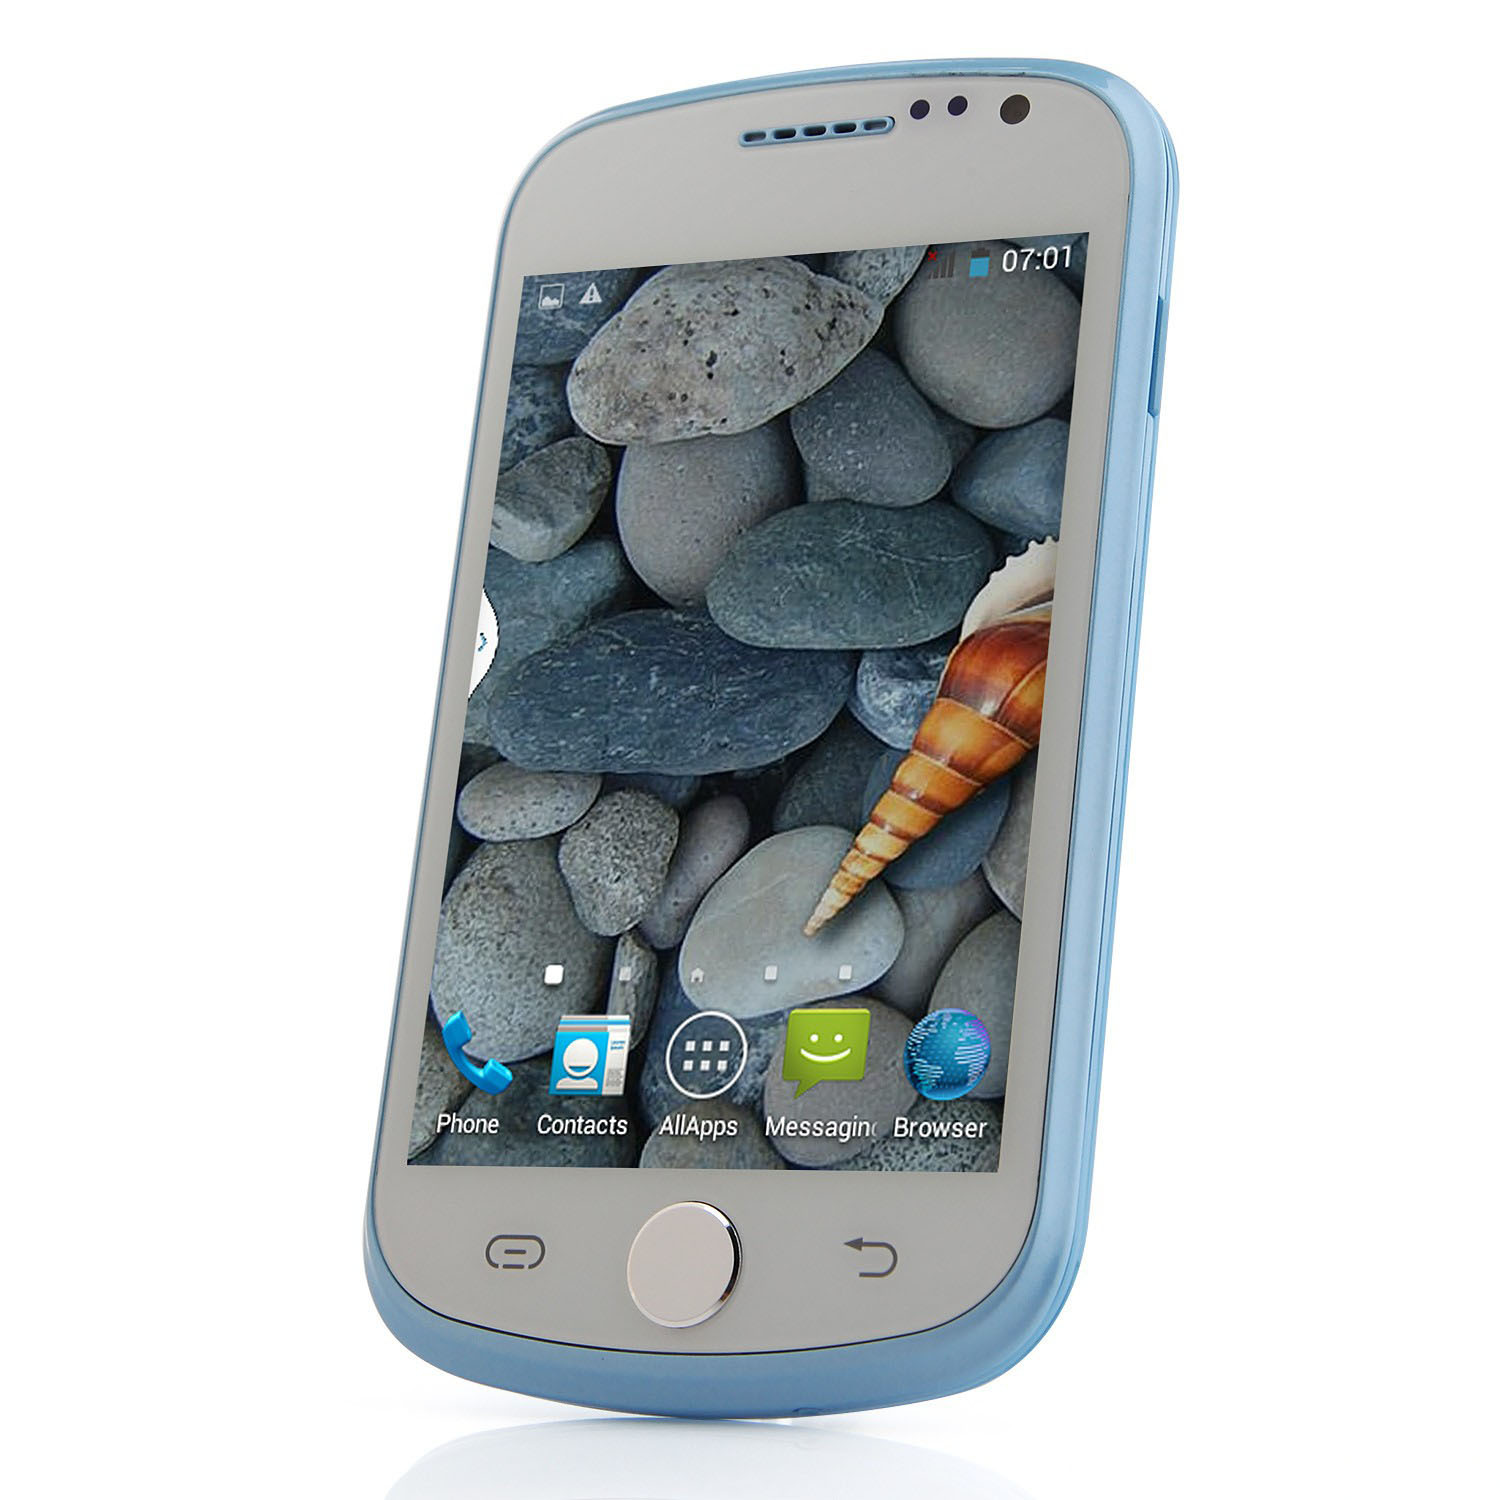 Best Szdevec New Z Doxio I6 Mtk6572 Dual Core Phone 1 0ghz 4 0 Capacitive Screen Android 4